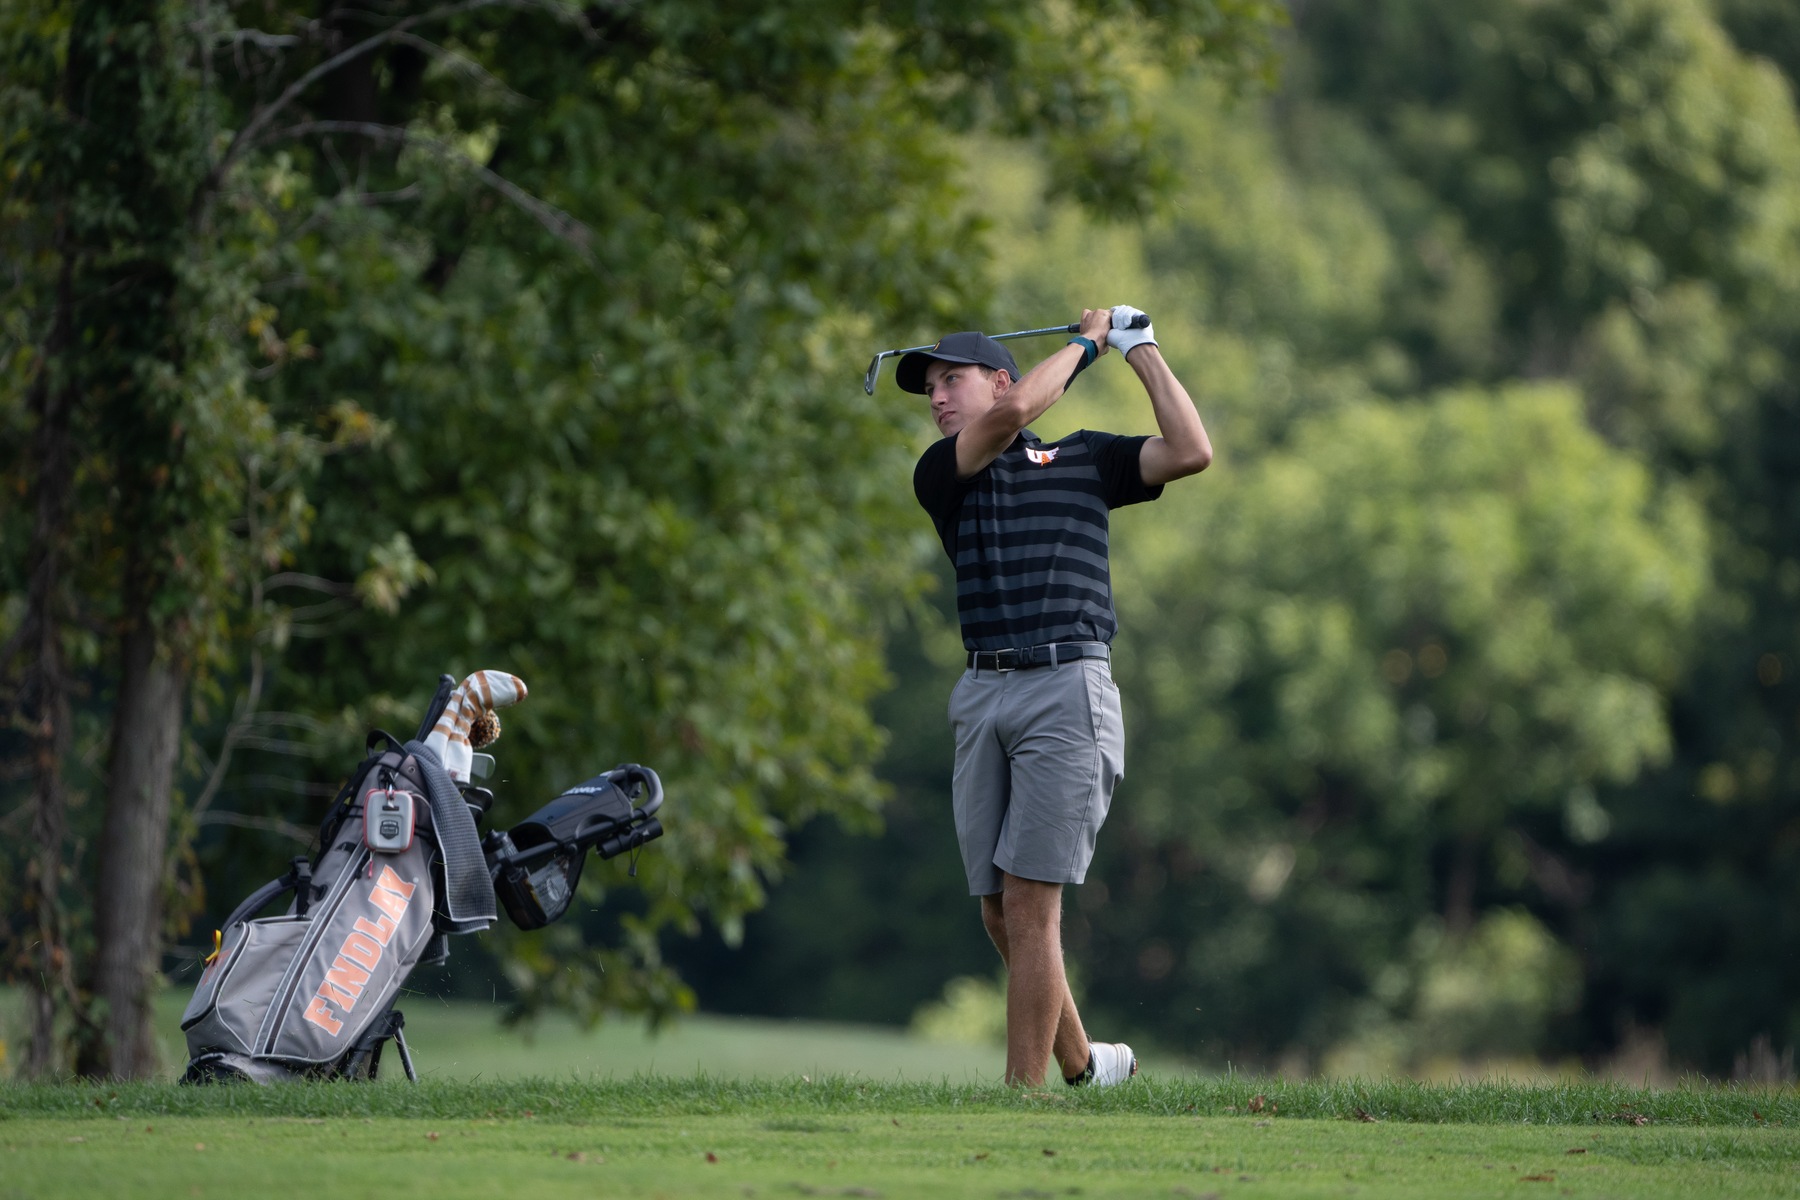 Oilers Look to Capture Another Tournament Win | Hold 4 Stroke Lead Heading to Final Round